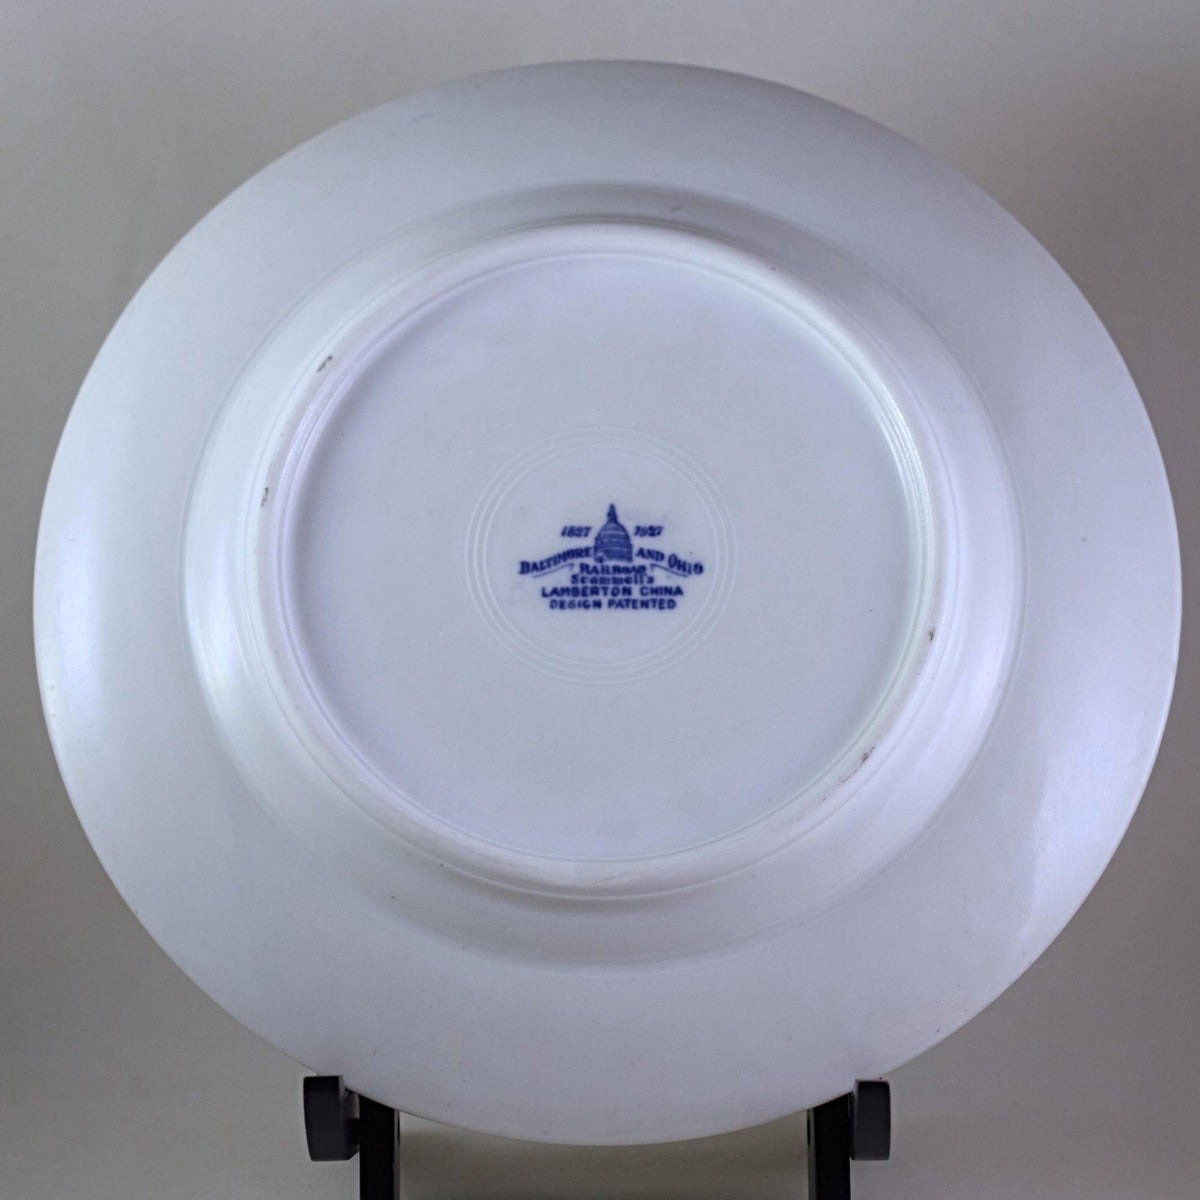 Details about   B&O Baltimore & Ohio Railroad Dining Car China 10.5" Plate Scammell's Lamberton 